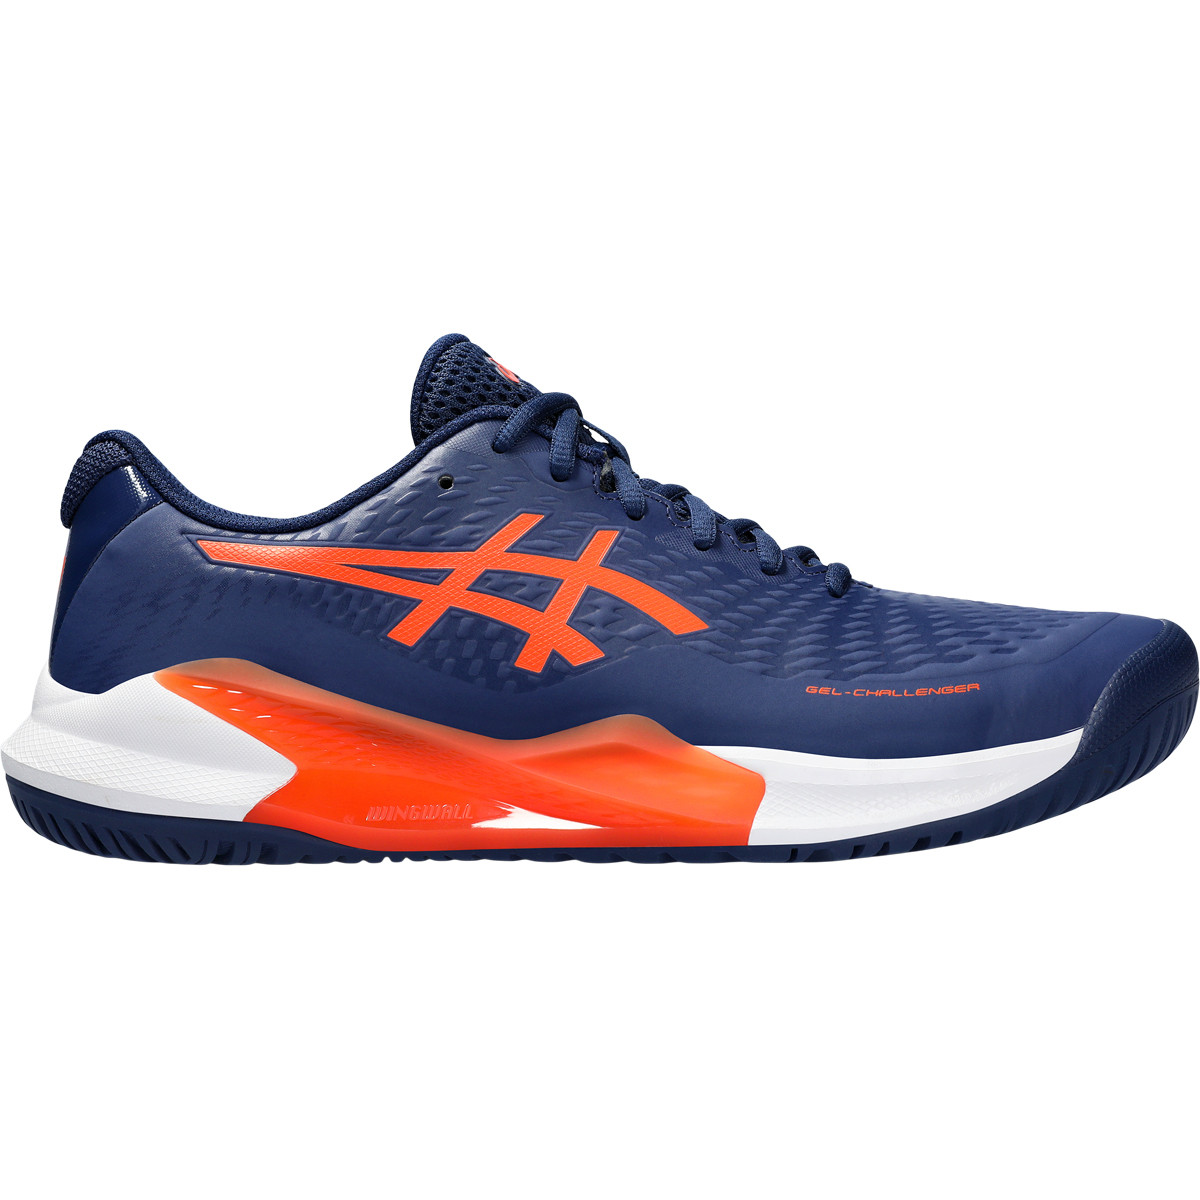 CHAUSSURES ASICS GEL-CHALLENGER 14 TOUTES SURFACES